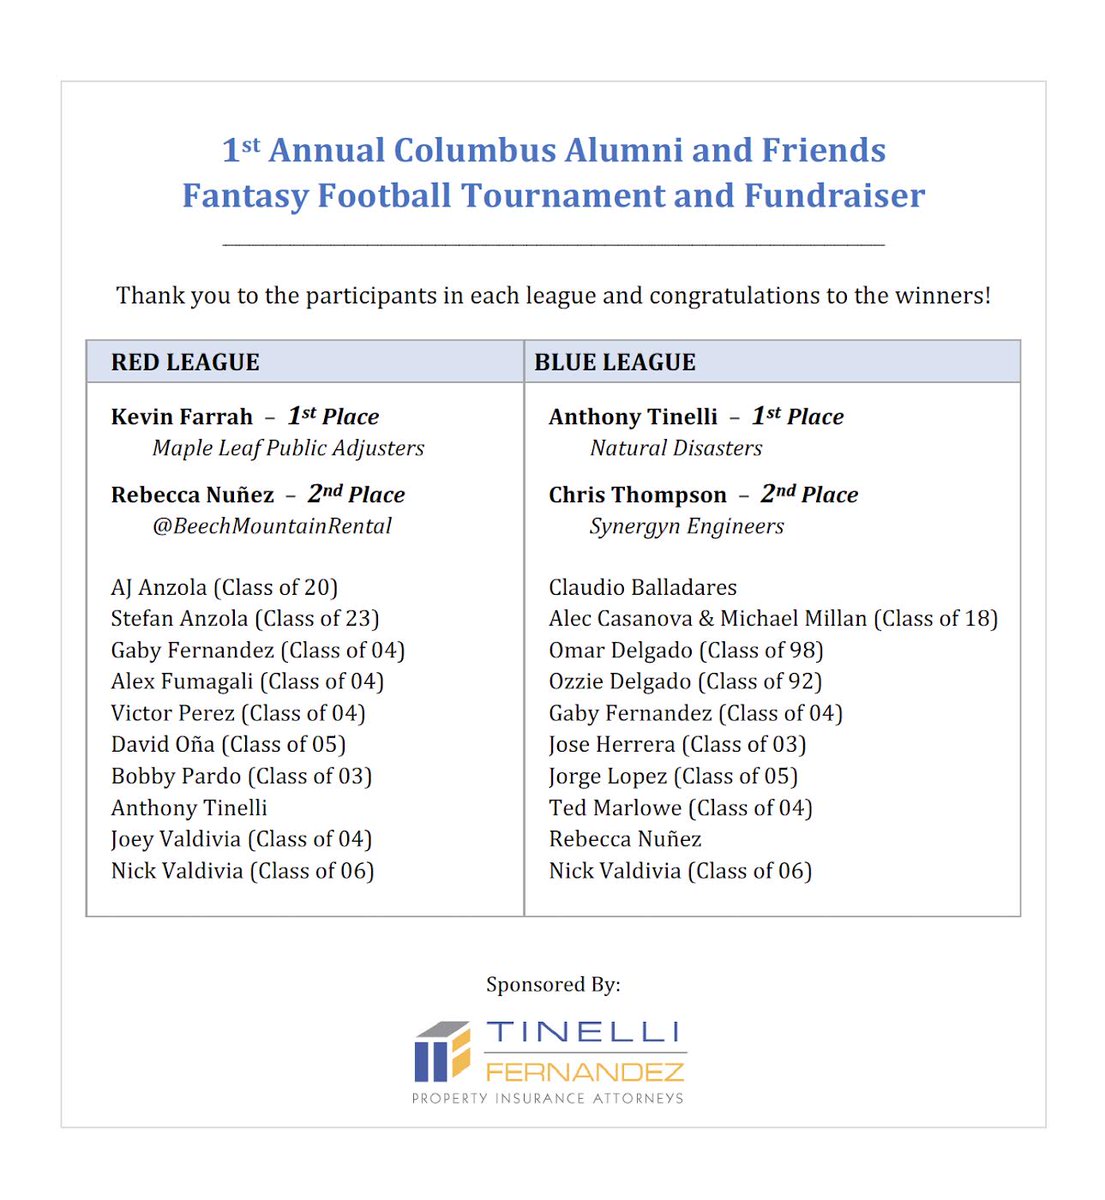 Thank you Gabriel Fernandez '04 and all the Explorers who participated in the fantasy football league and tournament his firm TINELLI hosted this year. The league was able to raise about $1,600 for CCHS and hopes to have 5 or 6 leagues next season. #CPride #Adelante https://t.co/m1WG7QIU8s